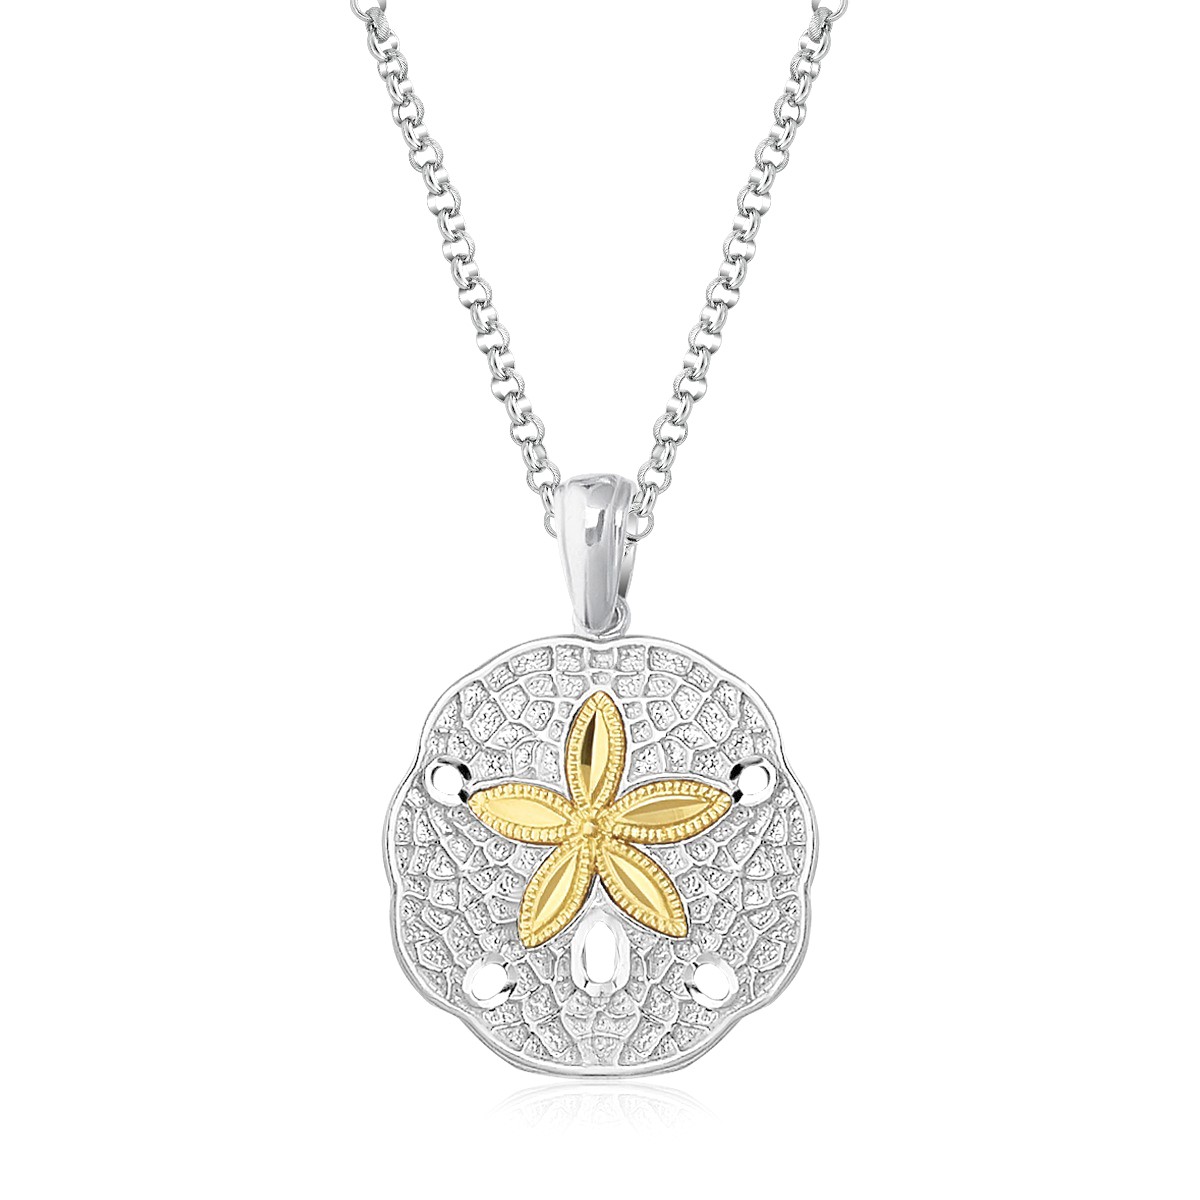 Limited Edition Silver & Gold Sand Dollar Necklace from Oka-B